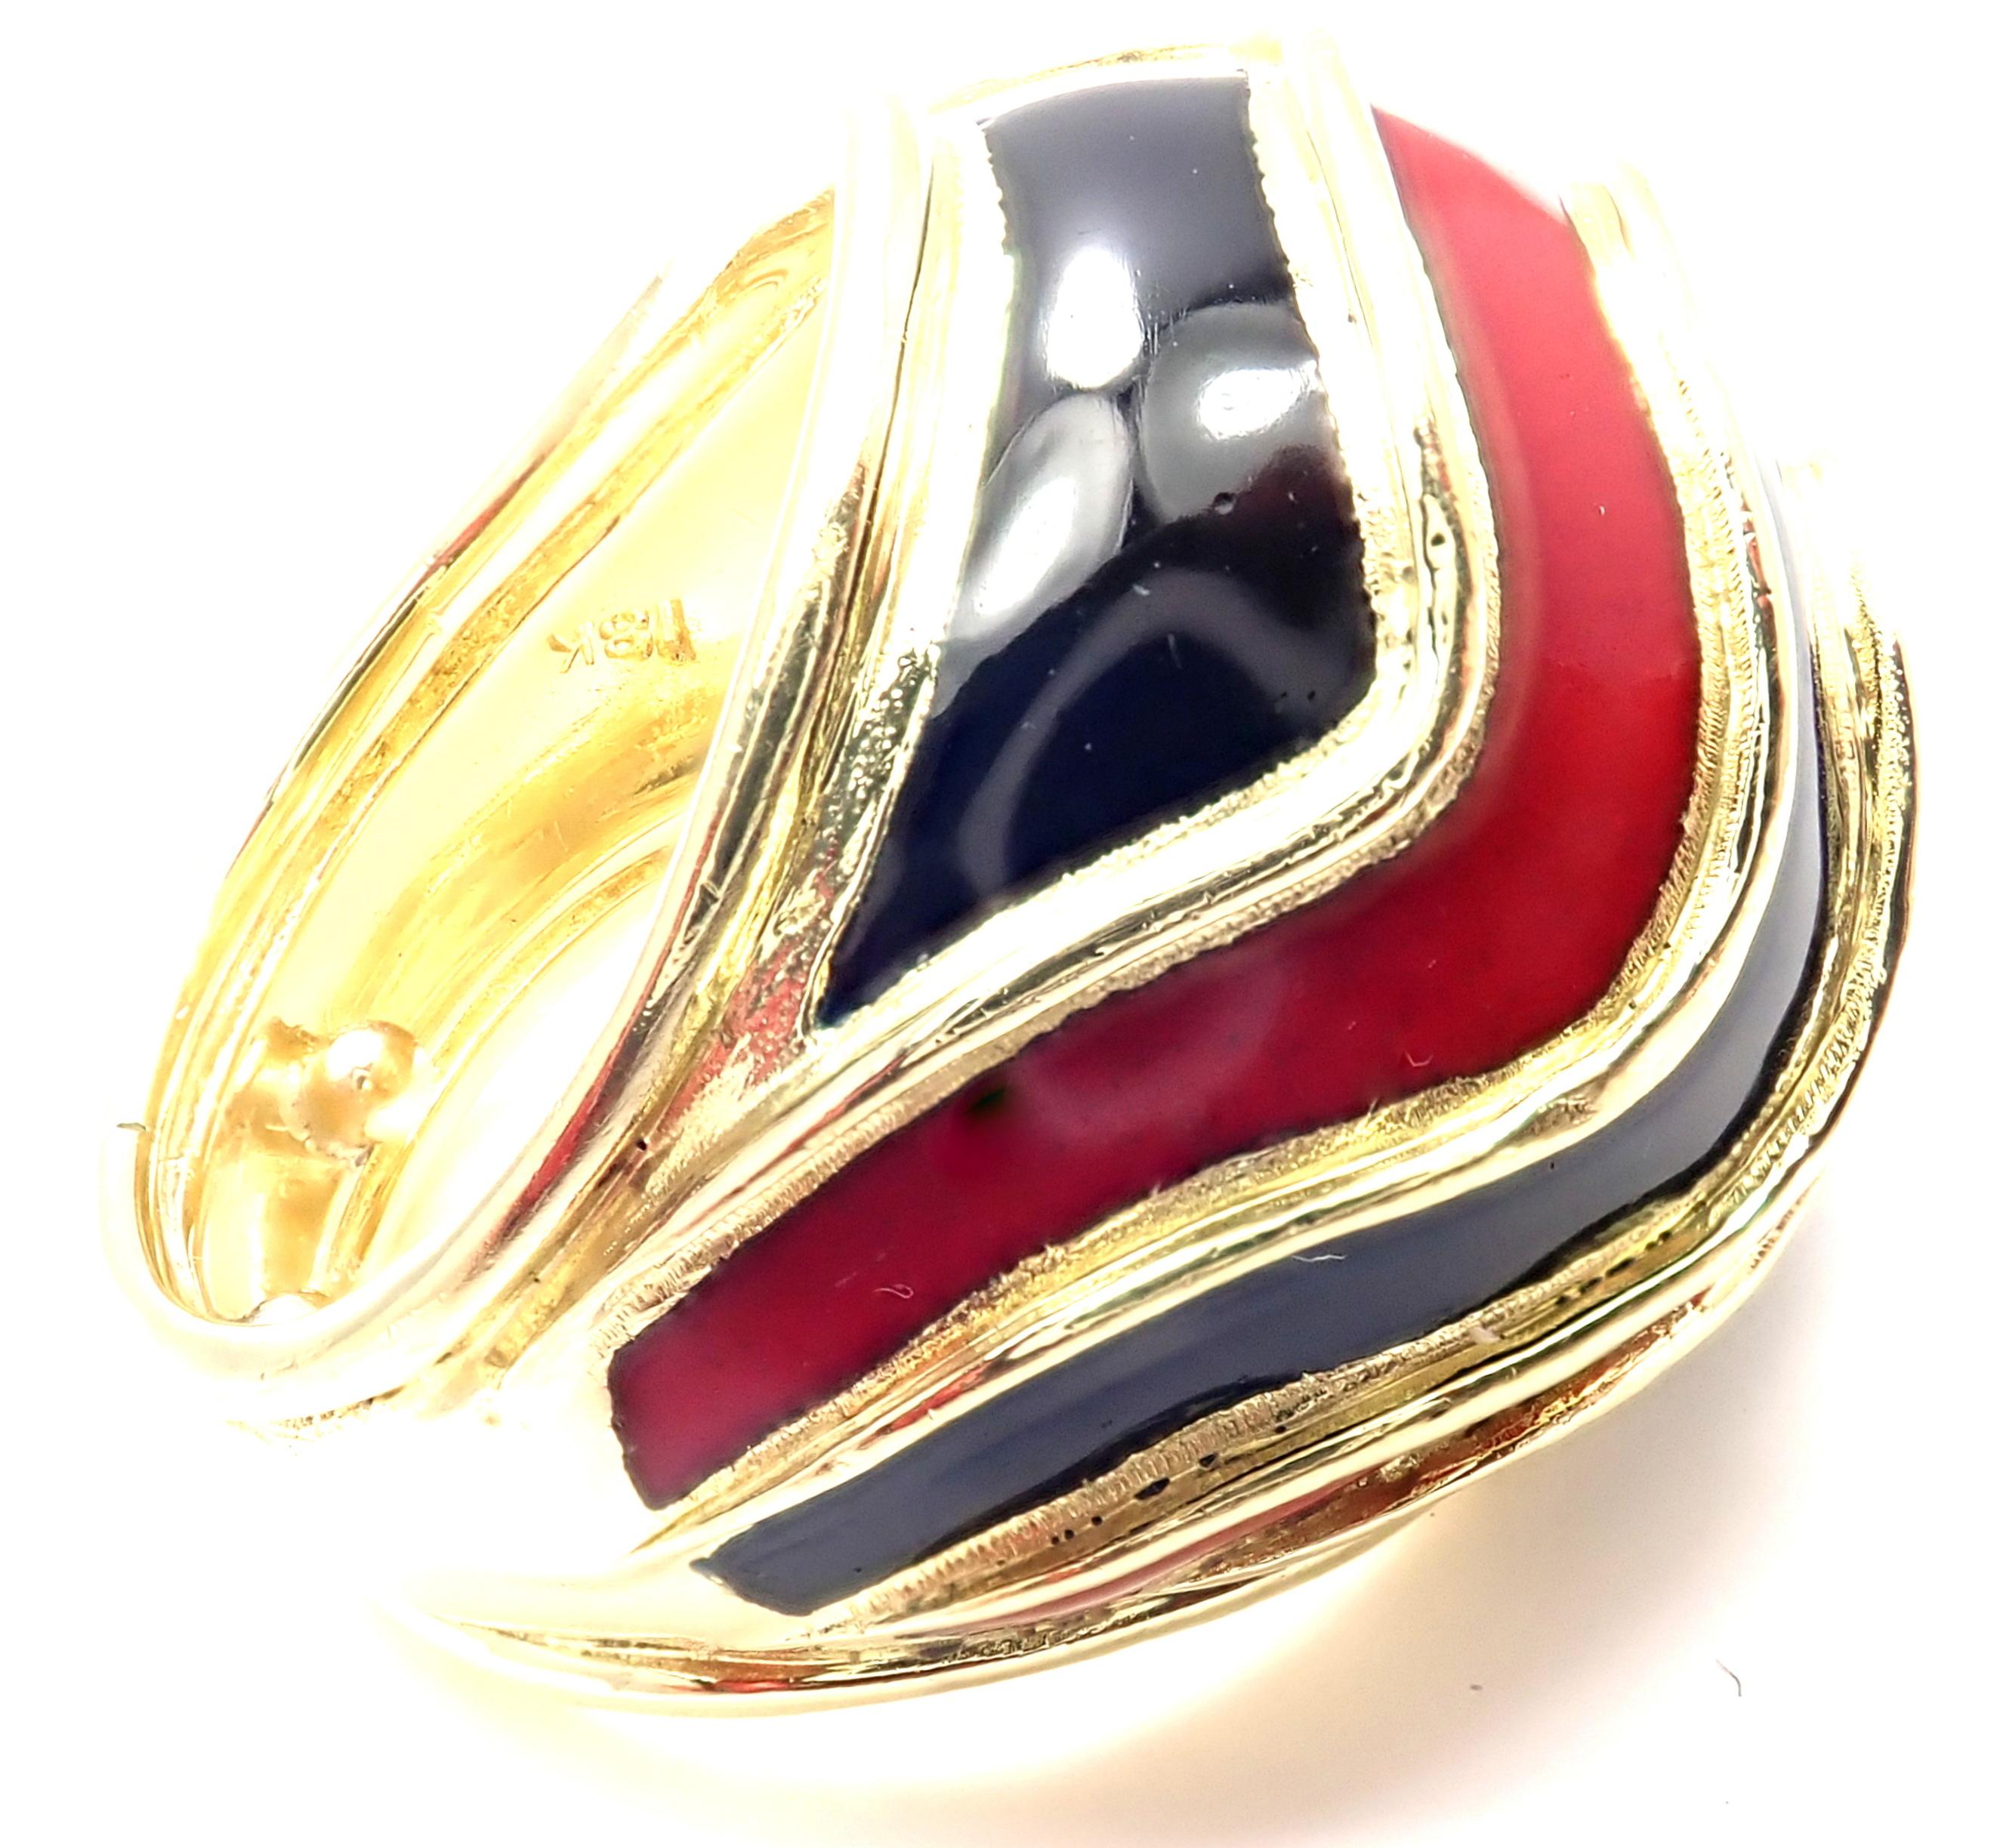 Vintage 18k Yellow Gold Enamel Dome Ring by Tiffany & Co. 
Details: 
Size: 4
Width: 20mm
Weight: 17.3 grams
Stamped Hallmarks: TIFFANY 18k
*Free Shipping within the United States*
YOUR PRICE: $2,700
T2459modd